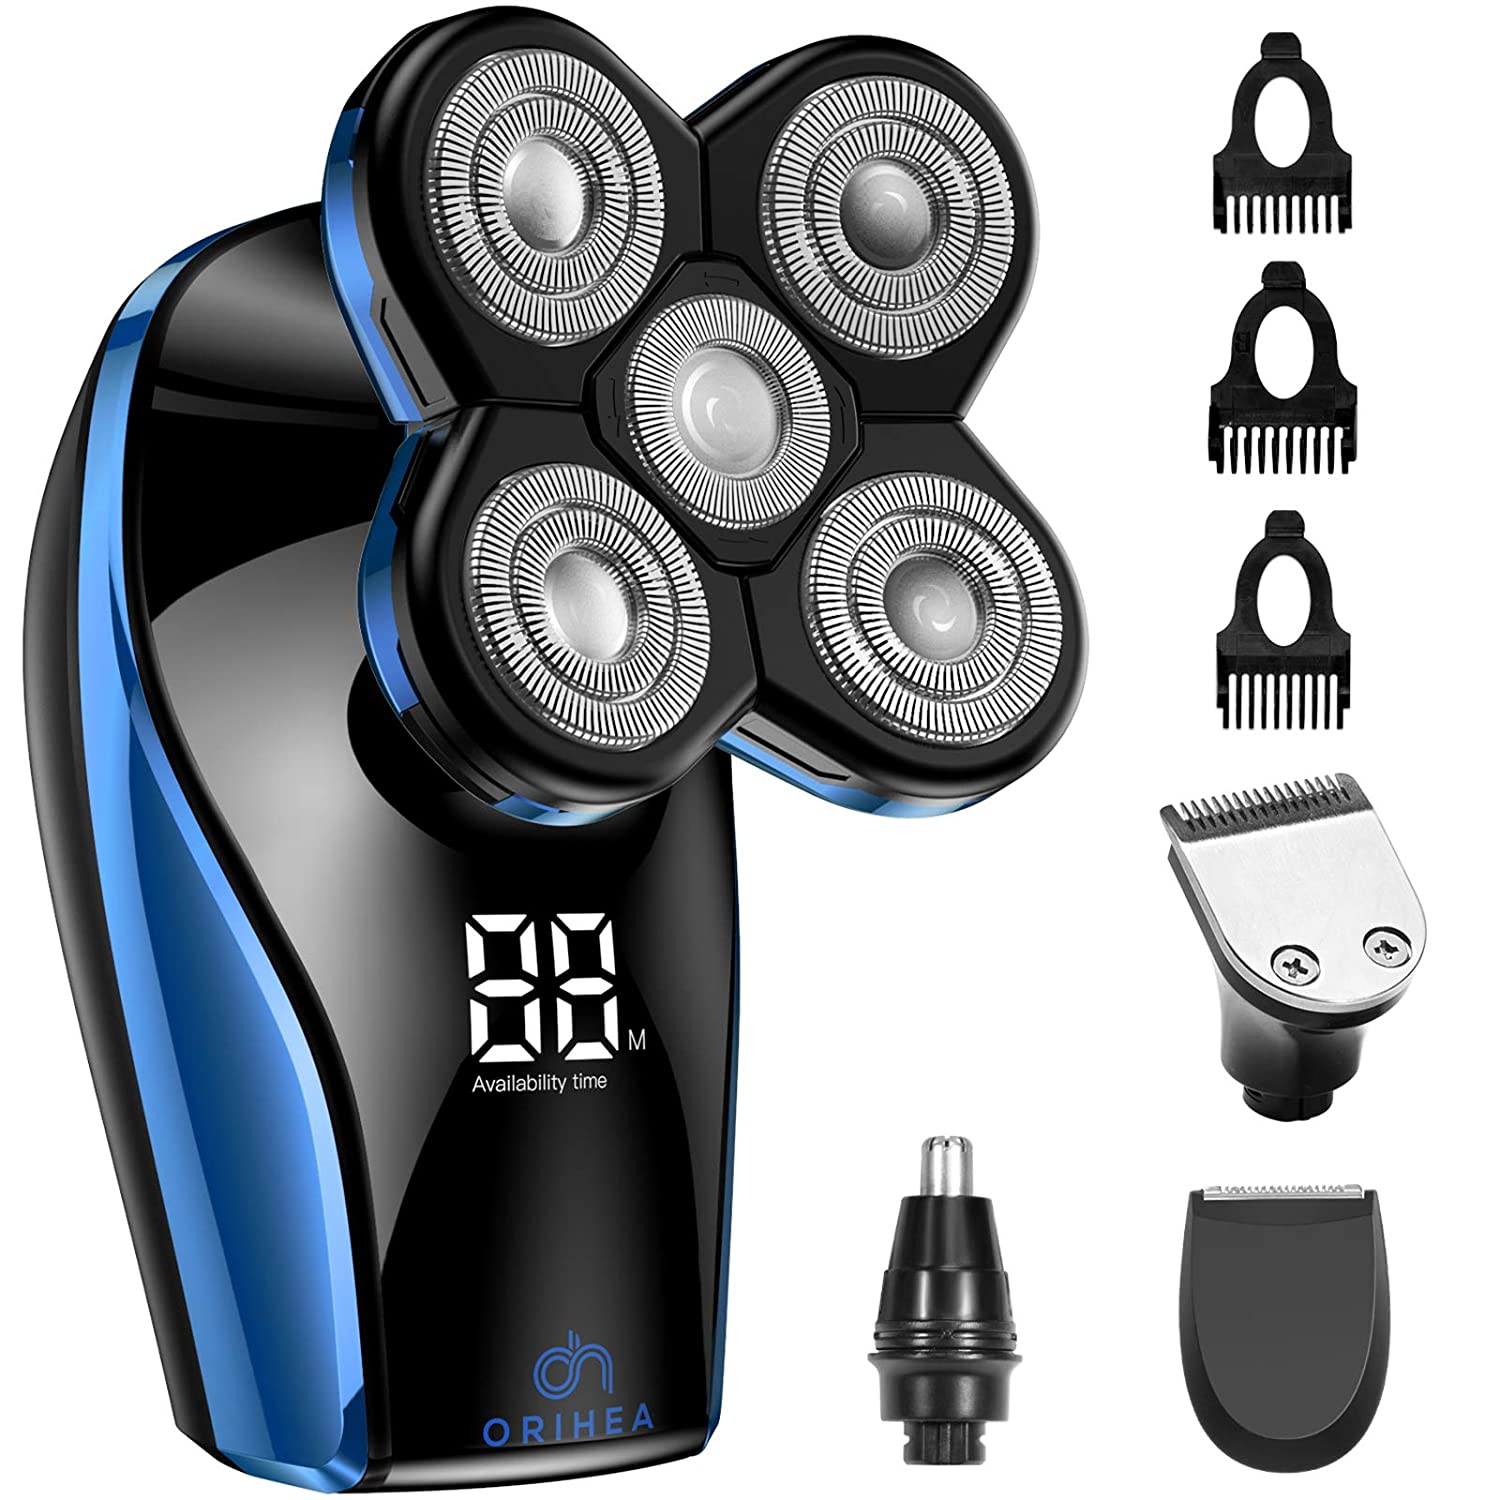 Electric Razor for Men - OriHea Head Shavers for Bald Men with LED Display, Faster-Charging 5D Floating Waterproof Electric Shaver for Men with Hair Clippers,Nose Hair Trimmer Blue - Home Decor Gifts and More